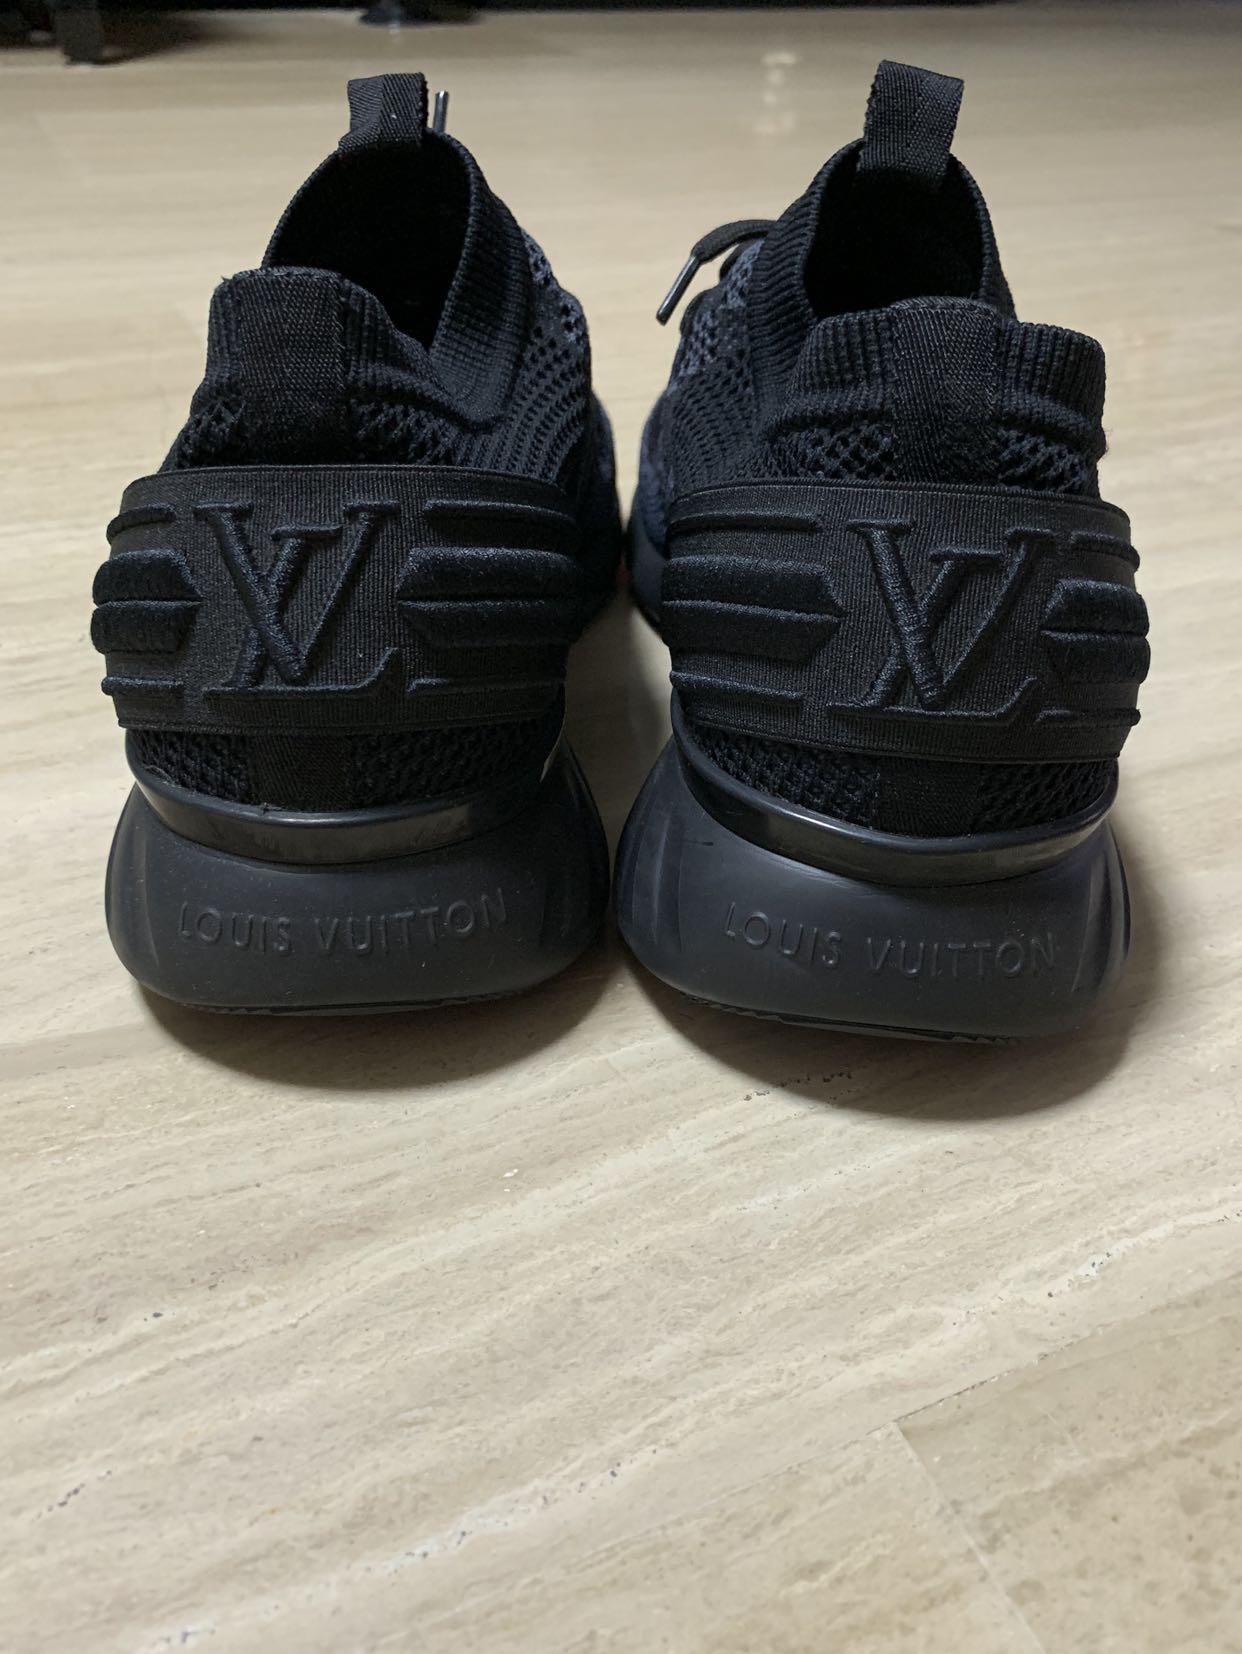 Fastlane cloth low trainers Louis Vuitton Black size 9.5 US in